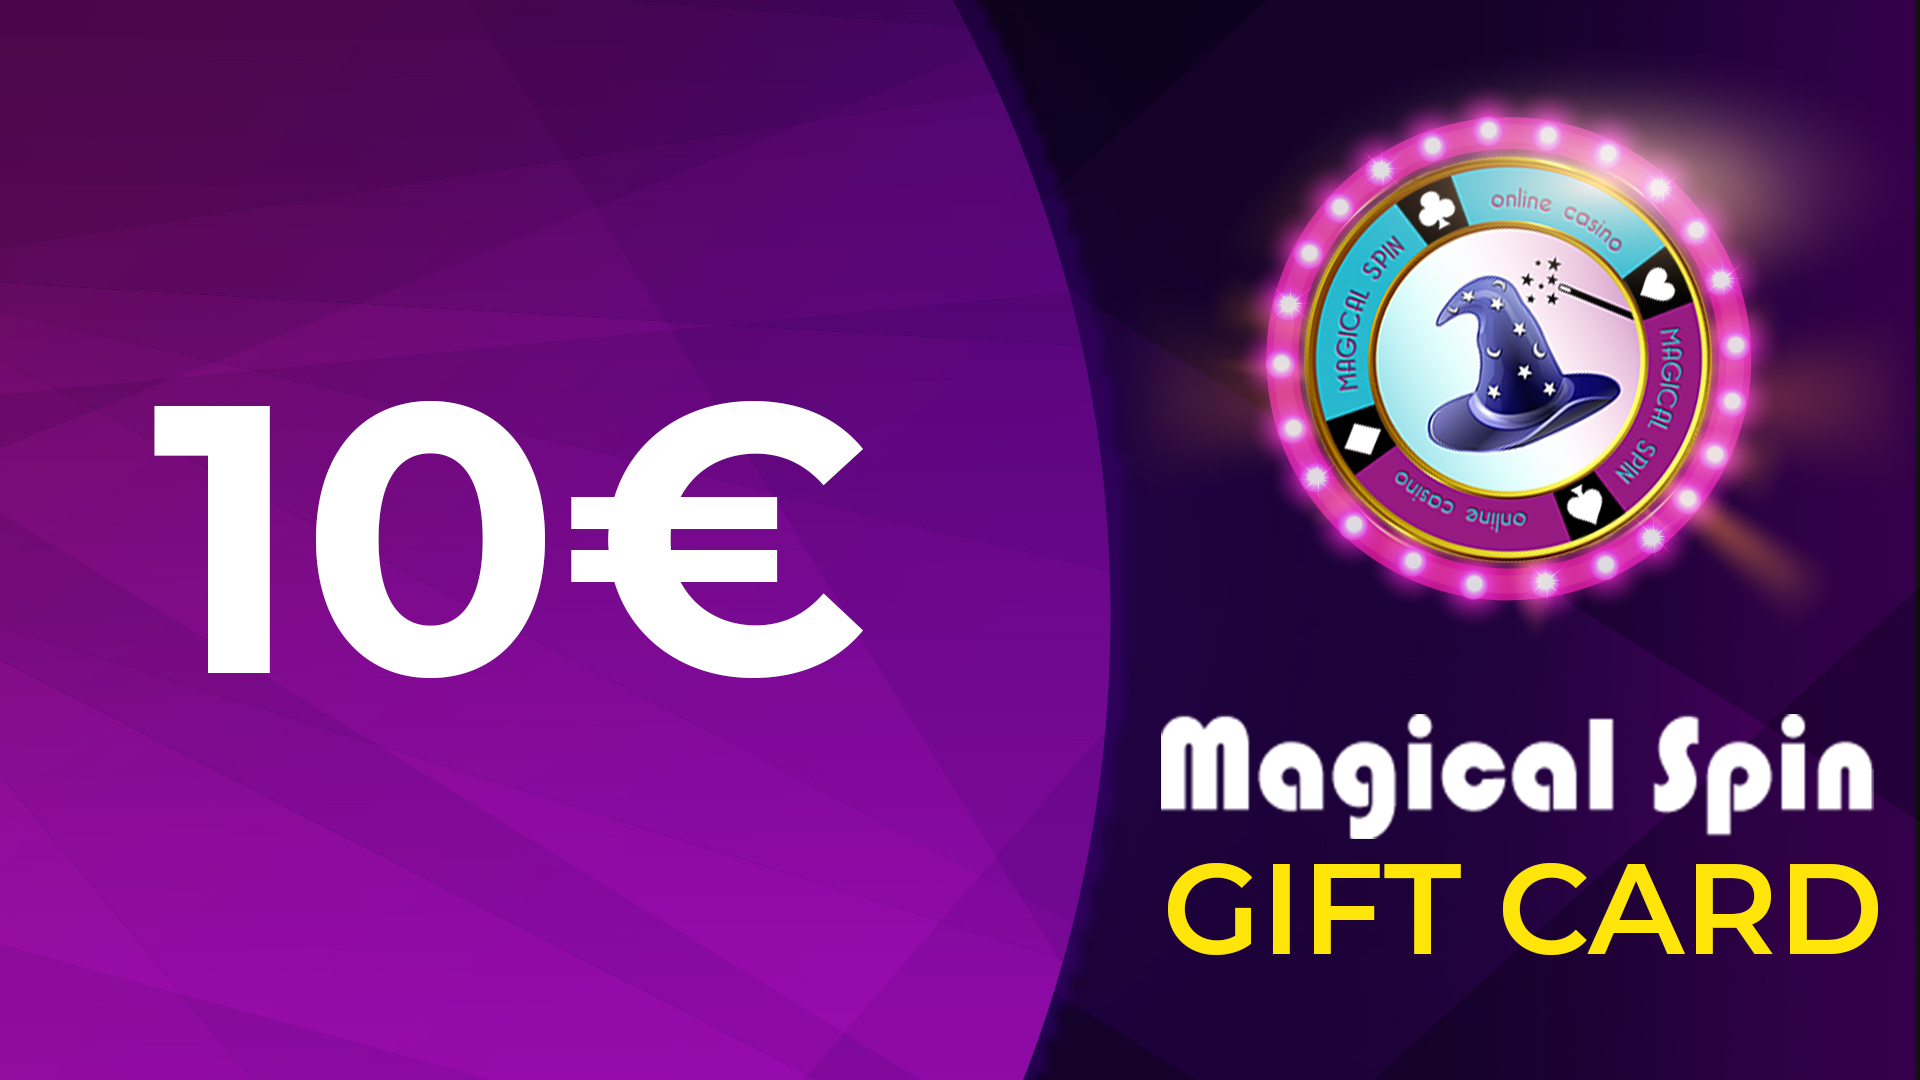 MagicalSpin - €10 Giftcard 10.99 $